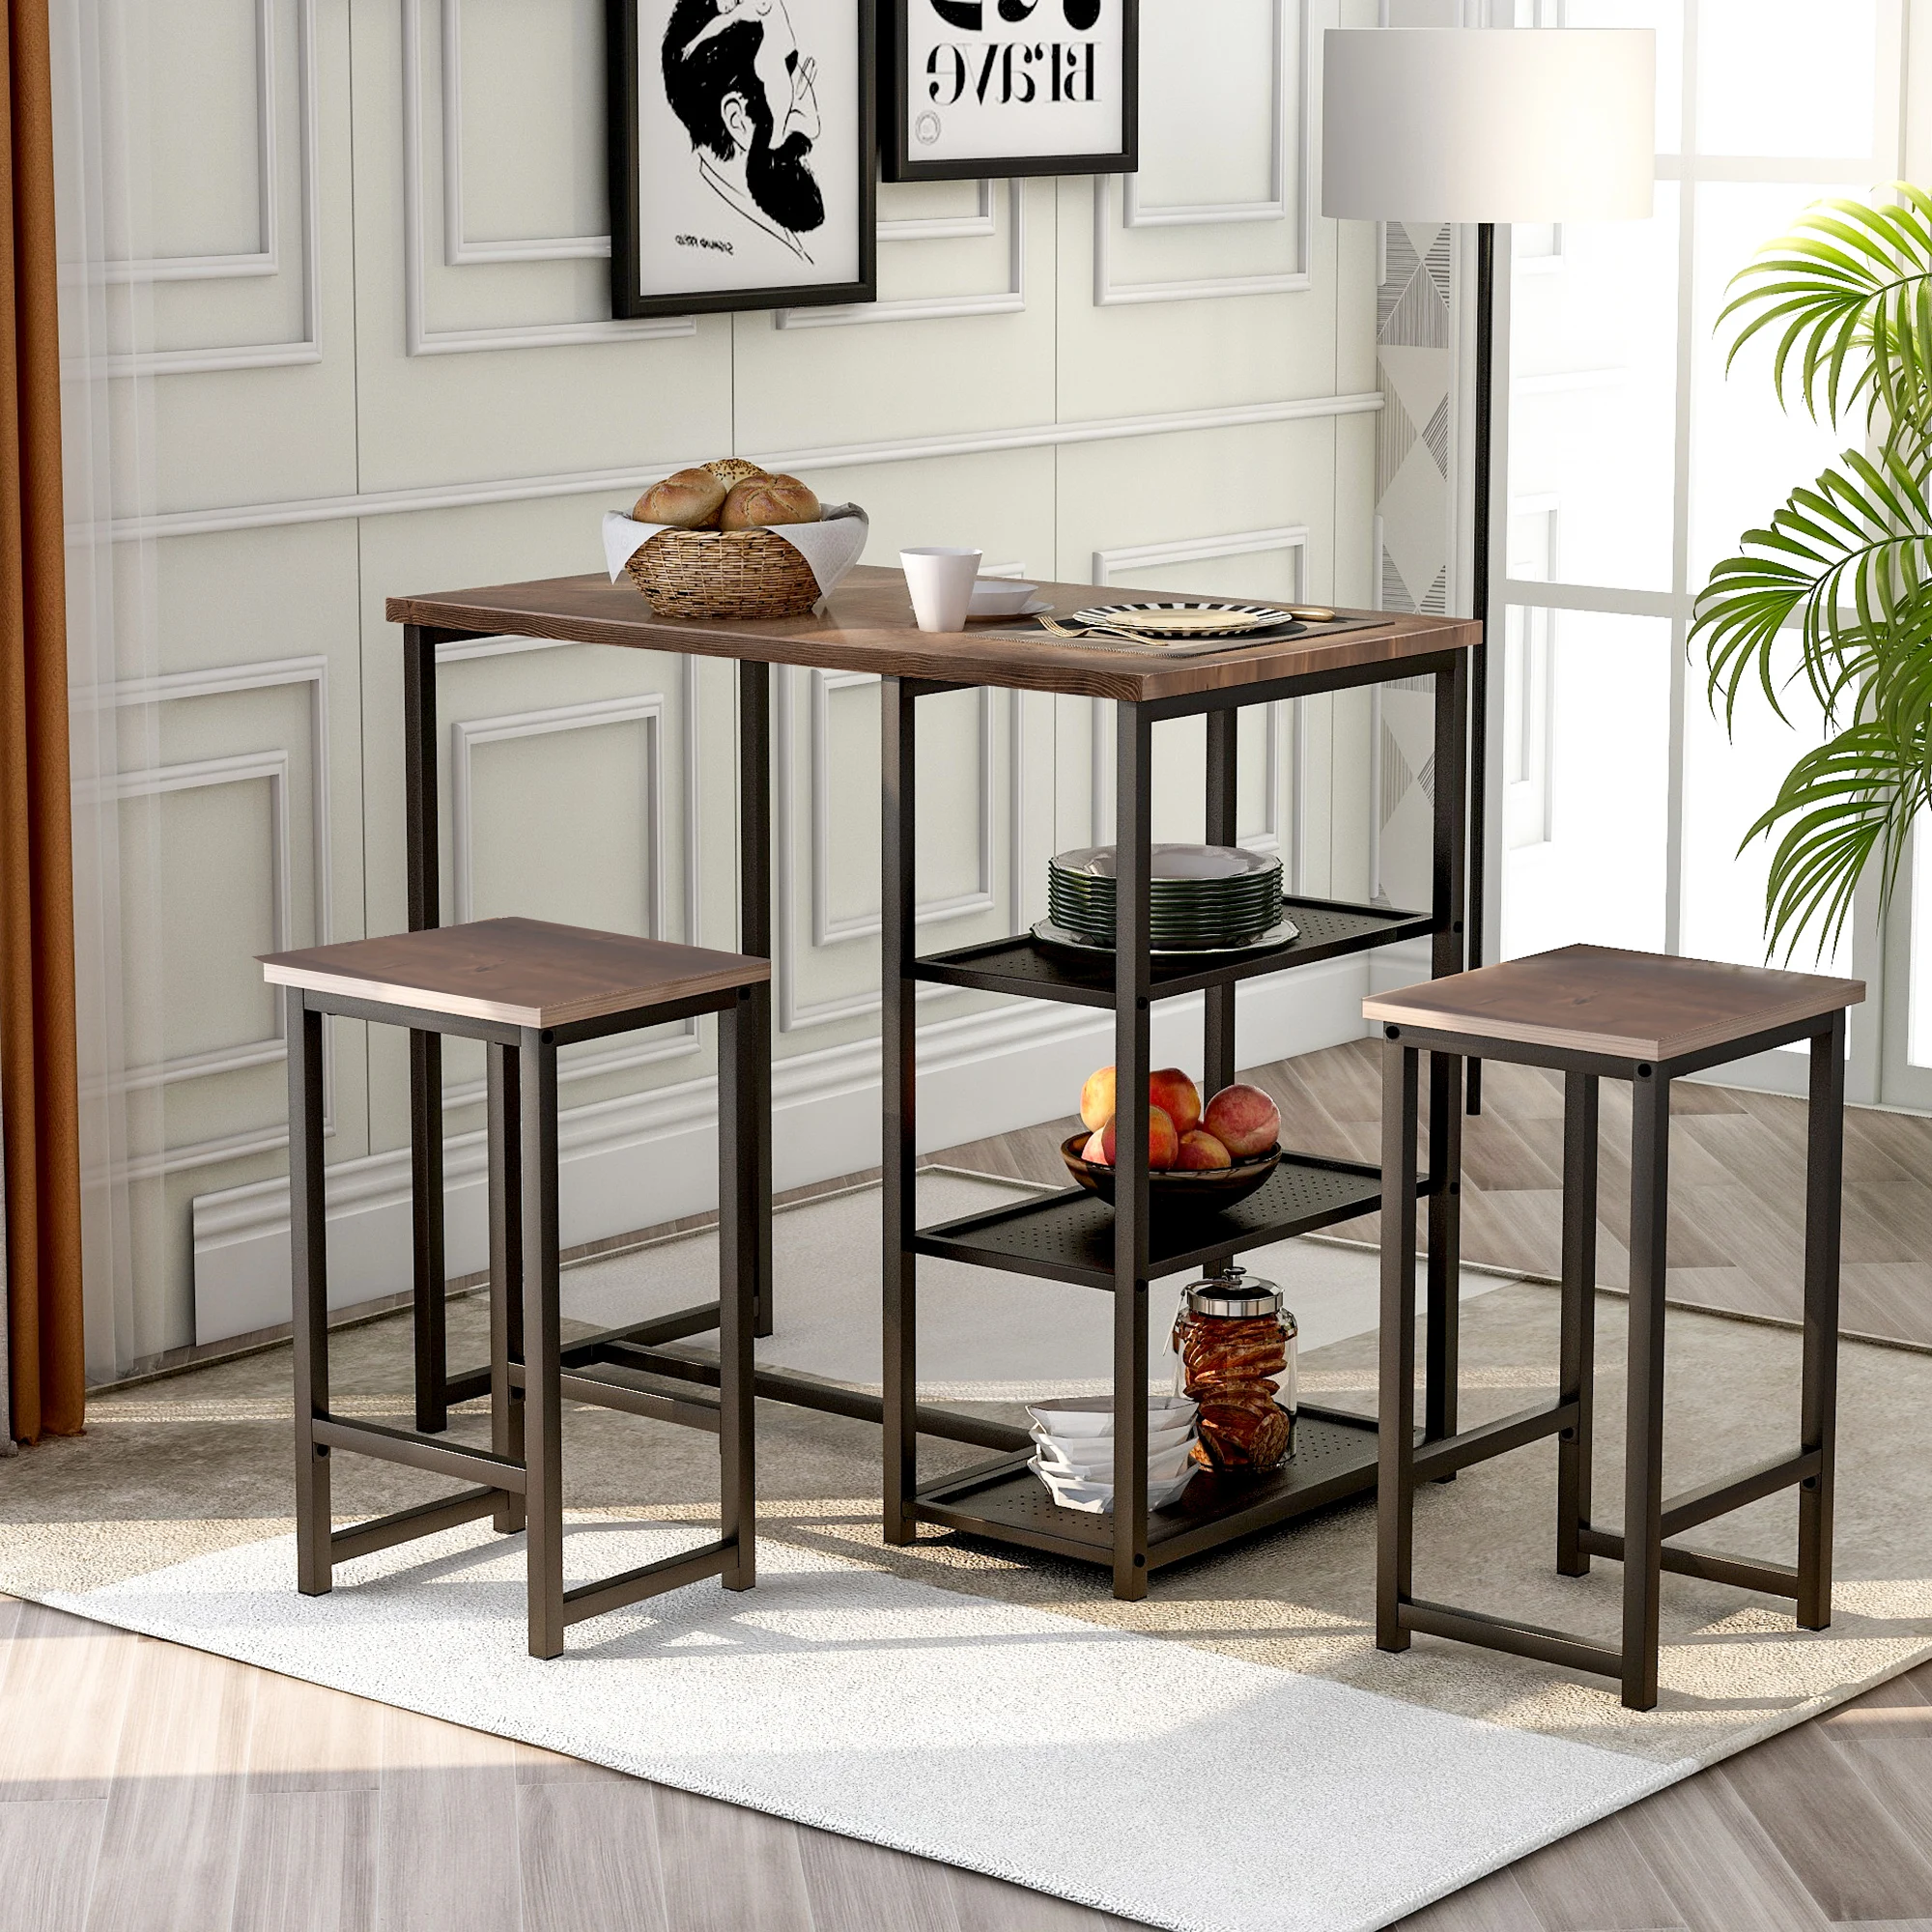 3-piece Retro Pub Set with Natural Wood Countertop and Bar Stools Brown/Black US Warehouse In Stock